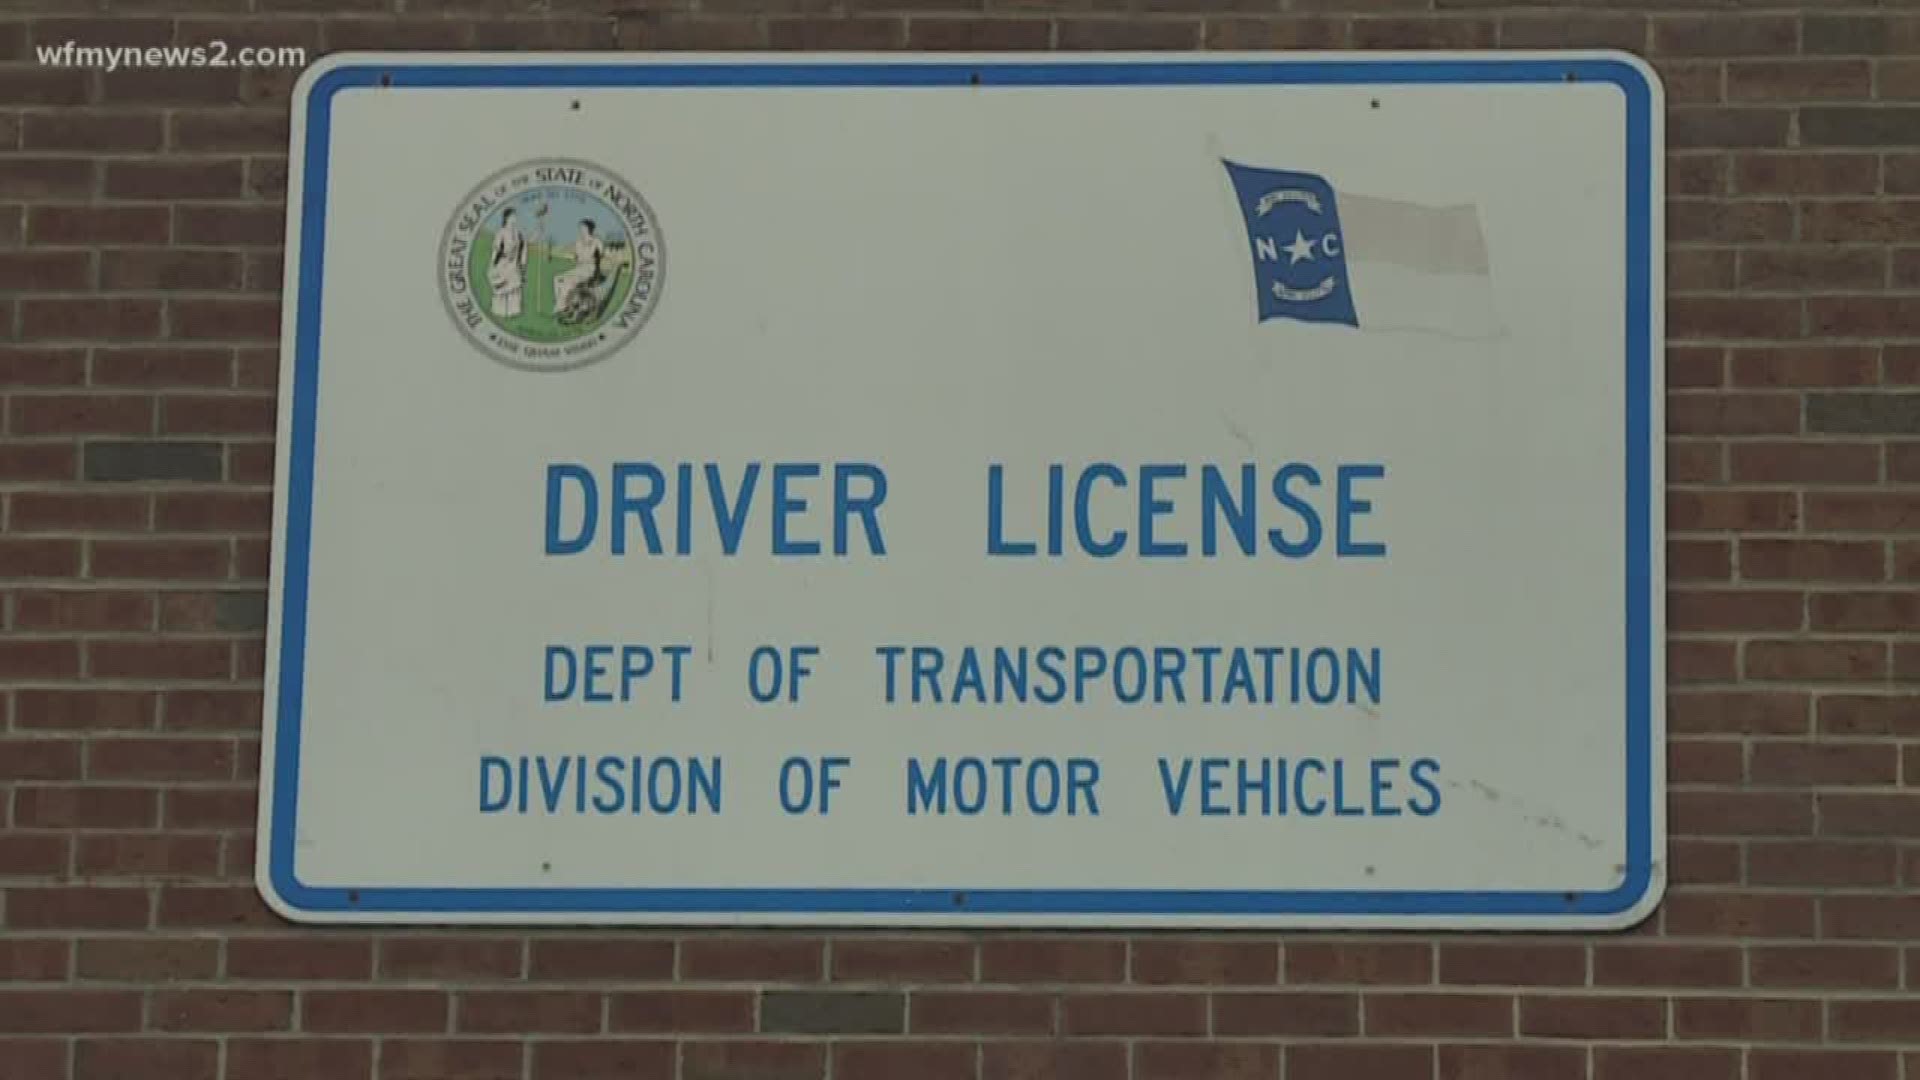 October 2020: The North Carolina Department of Motor Vehicles rolled out new requirements for your license to fly commercial, visit federal buildings and more.